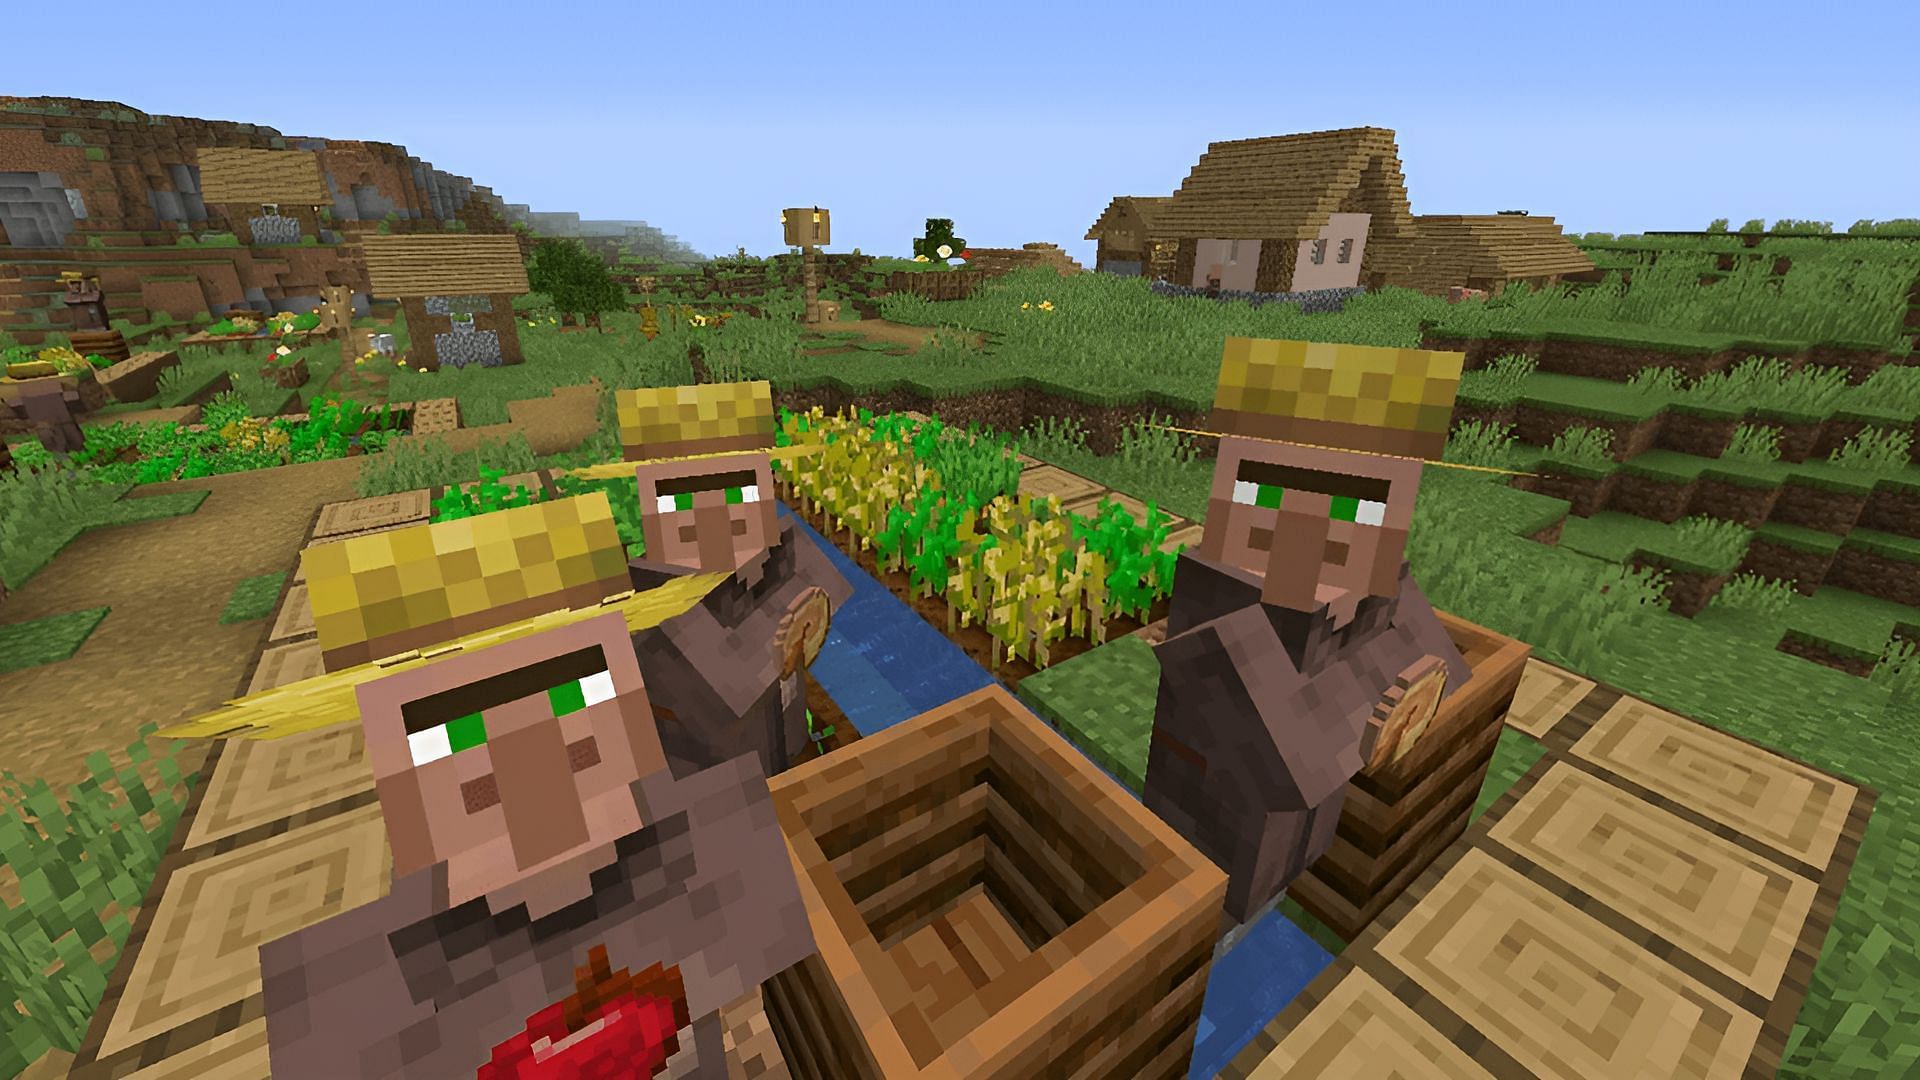 Villager trading is a quick way to rack up a ton of items and blocks in Minecraft (Image via Mojang)